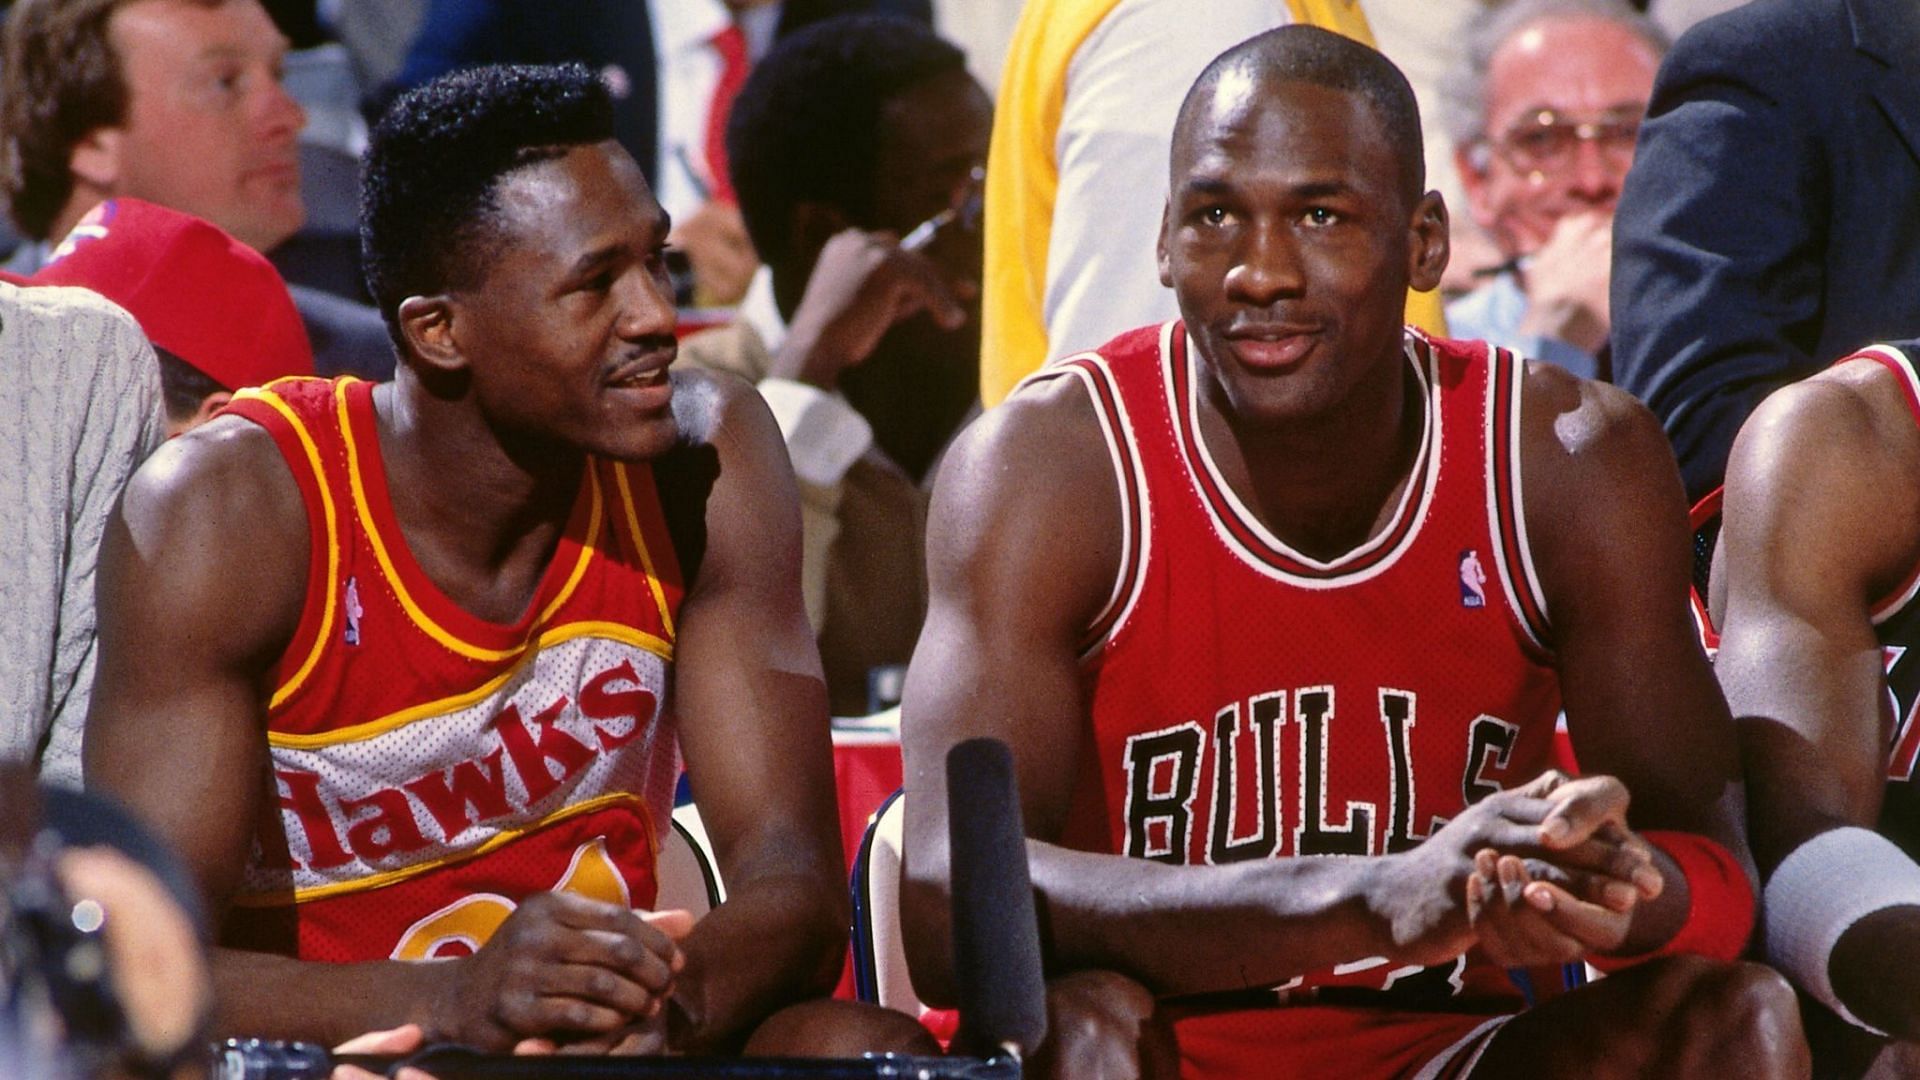 “He said ‘Yeah, you won’, and I said ‘Well, how you doin, Mike?’” – Dominique Wilkins on Michael Jordan grudgingly admitting he should have lost the 1988 Dunk Contest